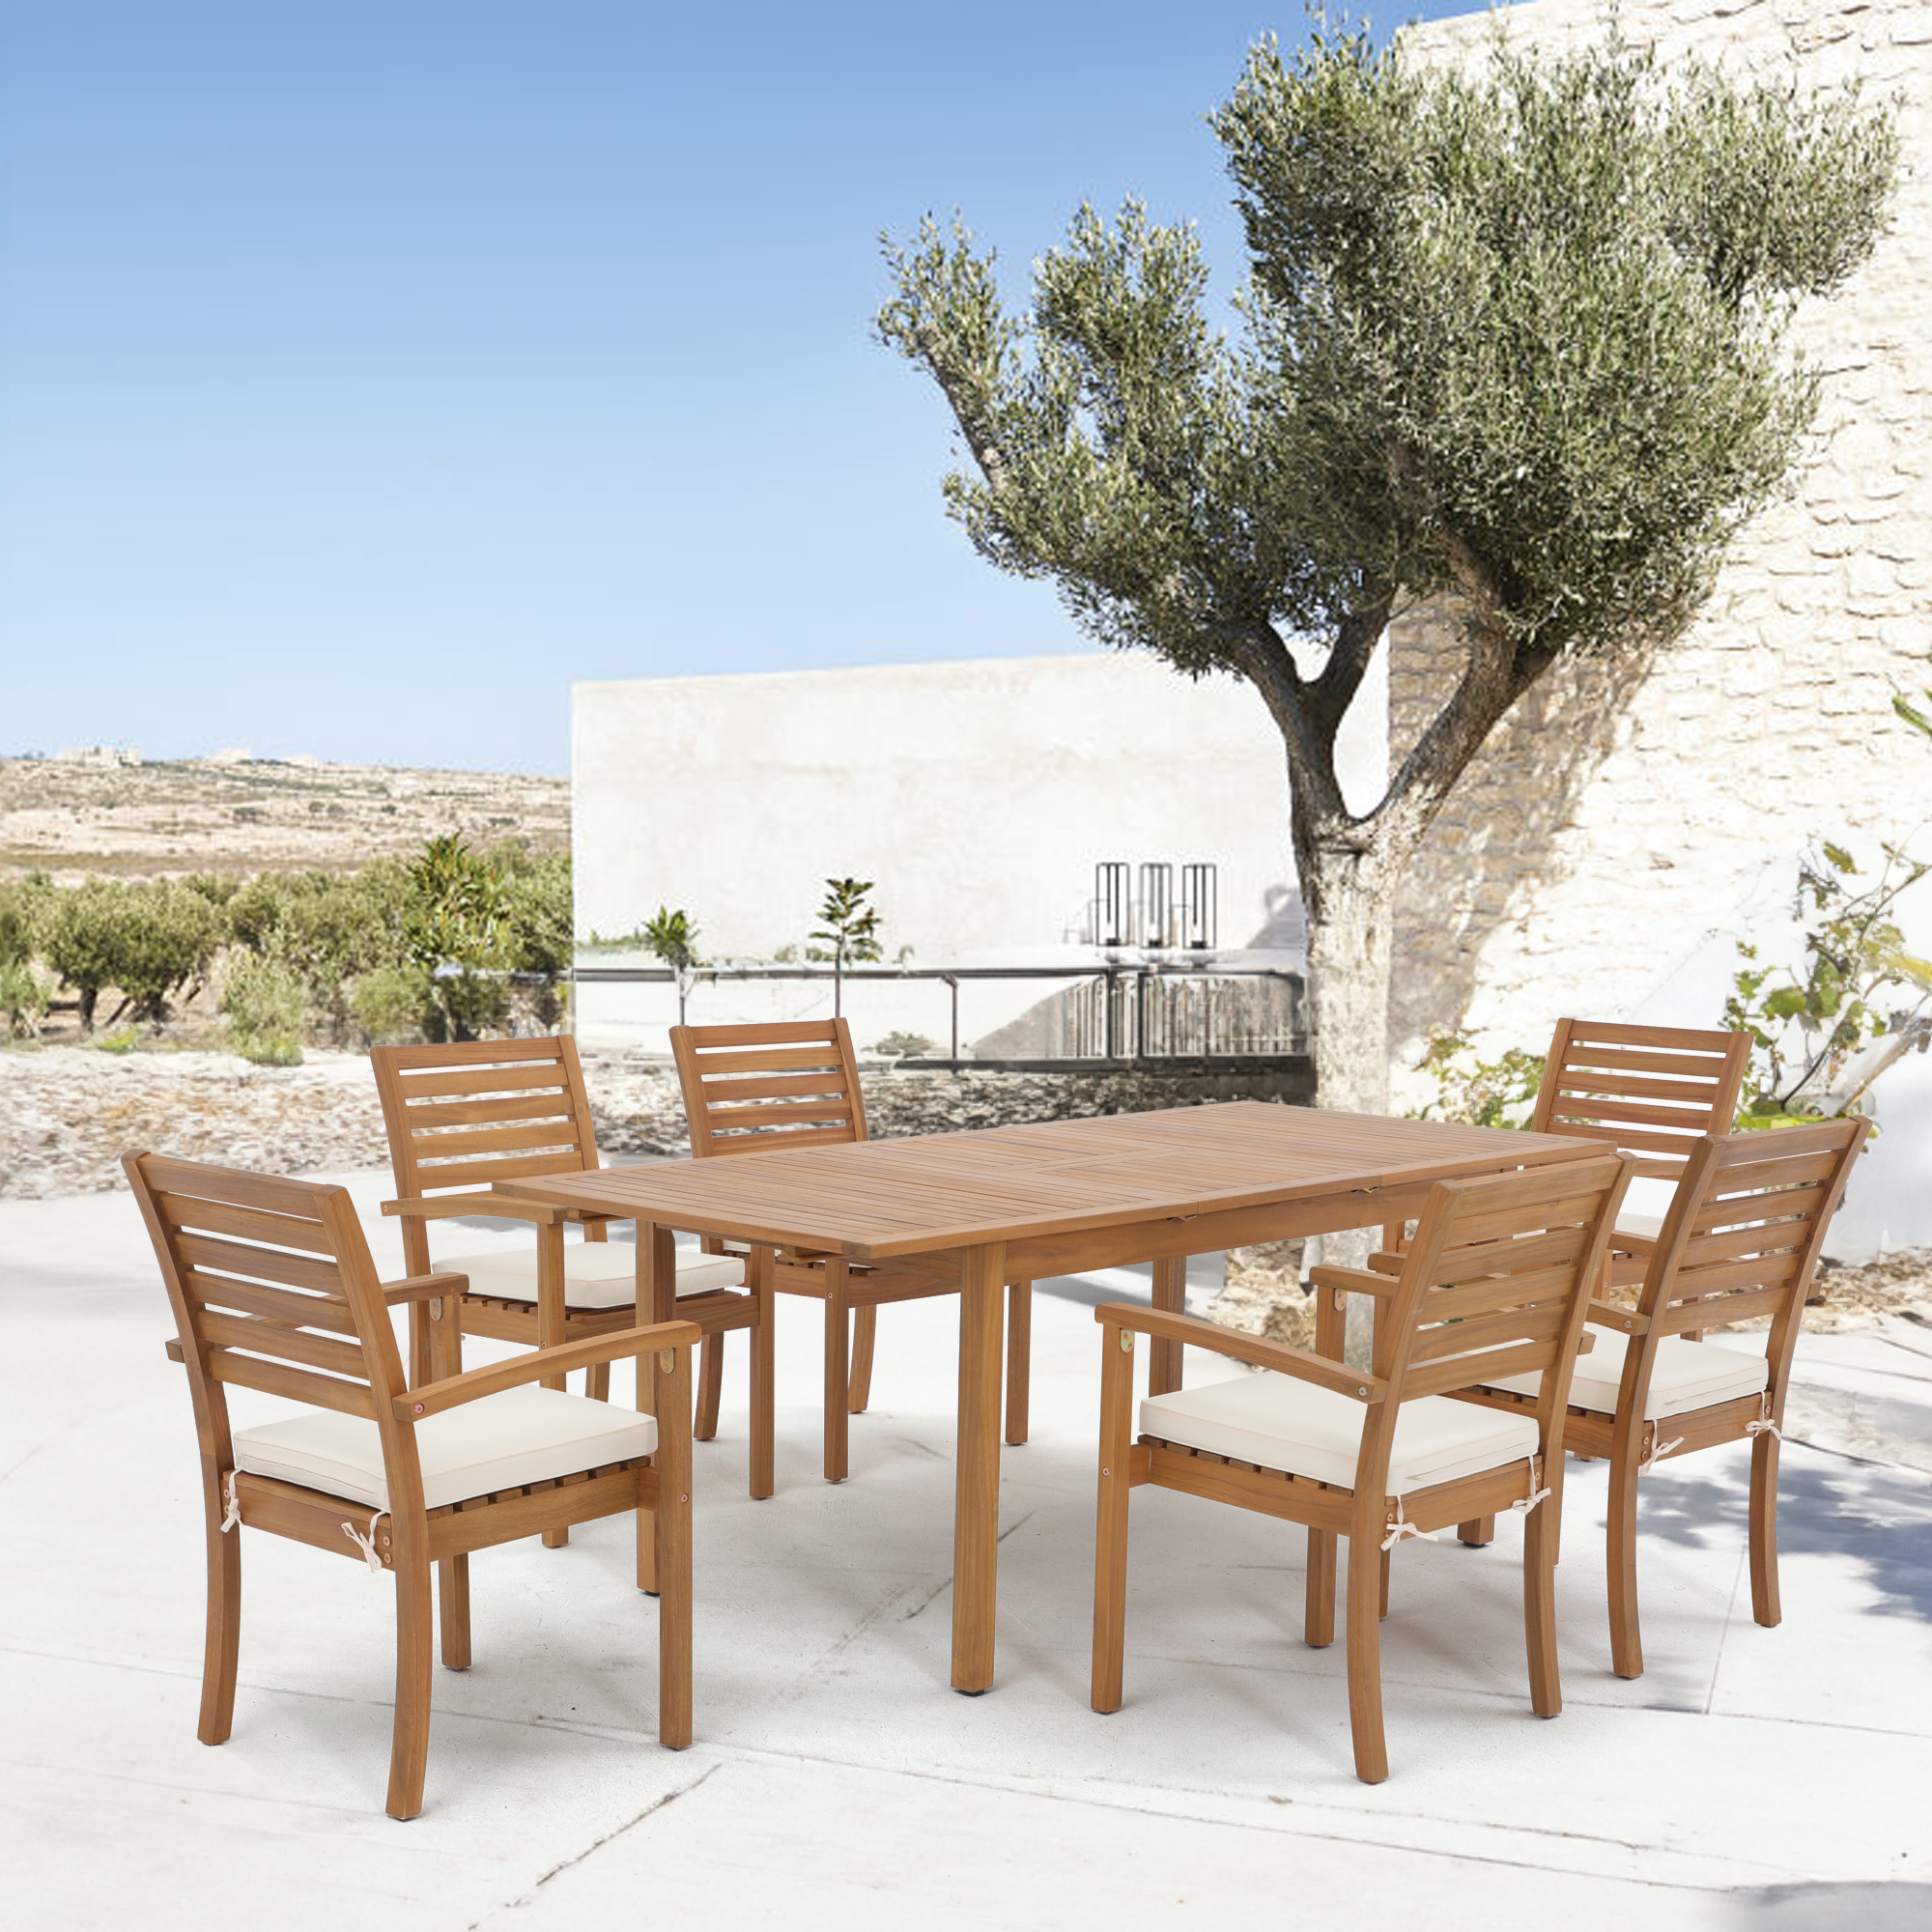 7 pcs Outdoor FSC Certified Acacia Wood Dining Set, Extendable Rectangular Table and 6 Stackable Chairs 